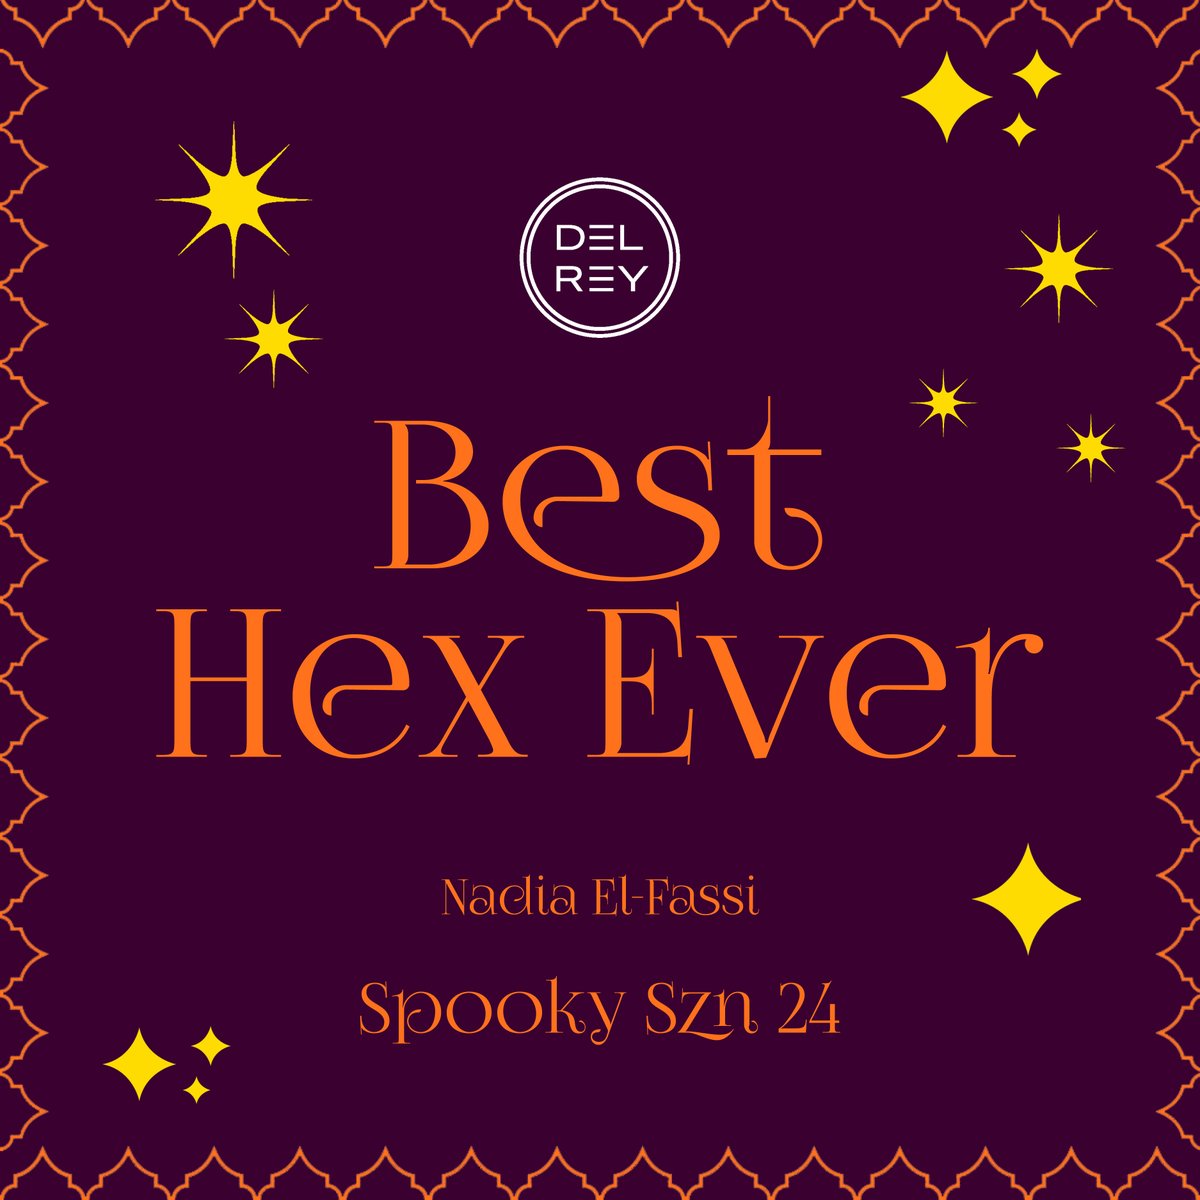 We've had ourselves a little title change! My spicy, cosy fantasy romance with a kitchen witch and brooding museum curator is now called BEST HEX EVER, and you can pre-order it now: tinyurl.com/4npty4ef